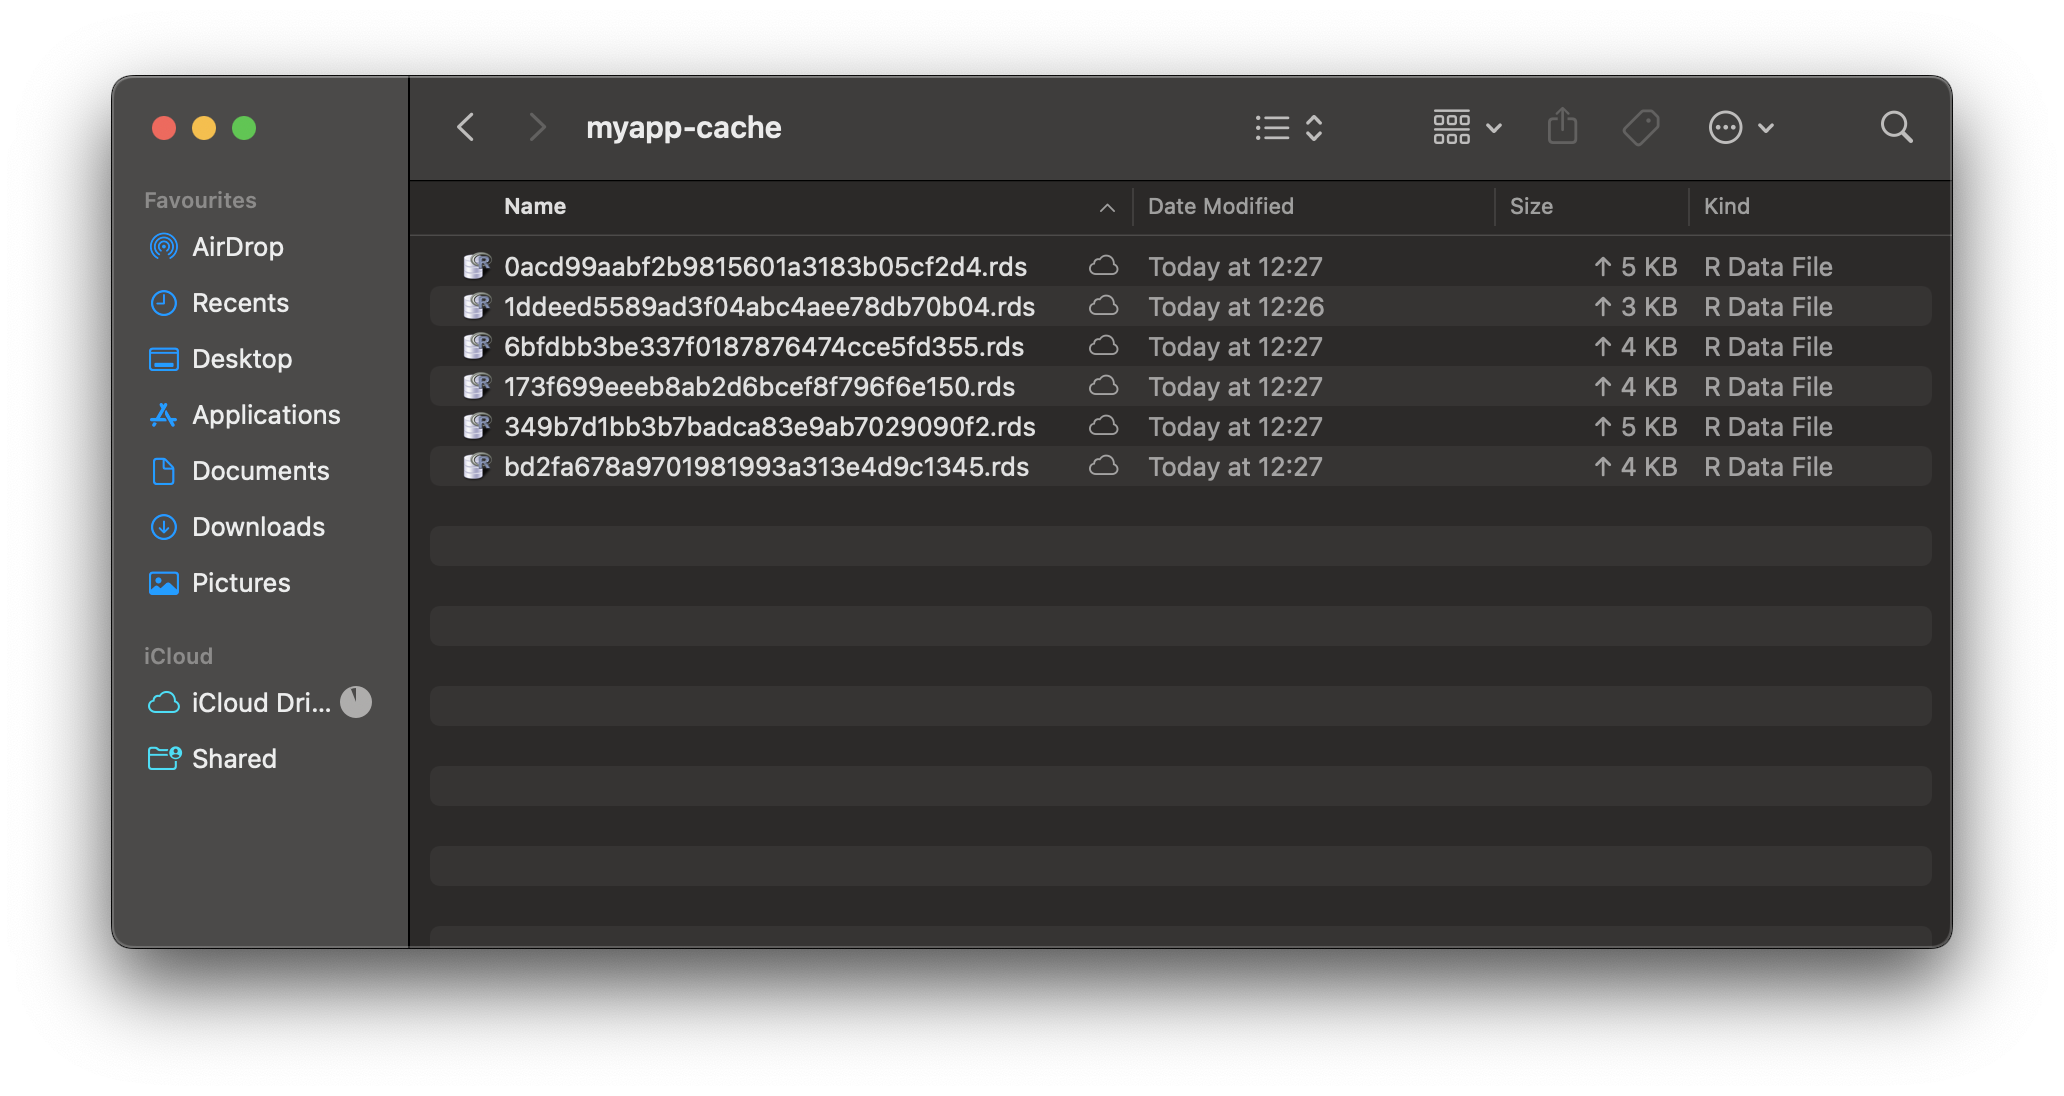 Image 2 - Contents of the myapp-cache directory